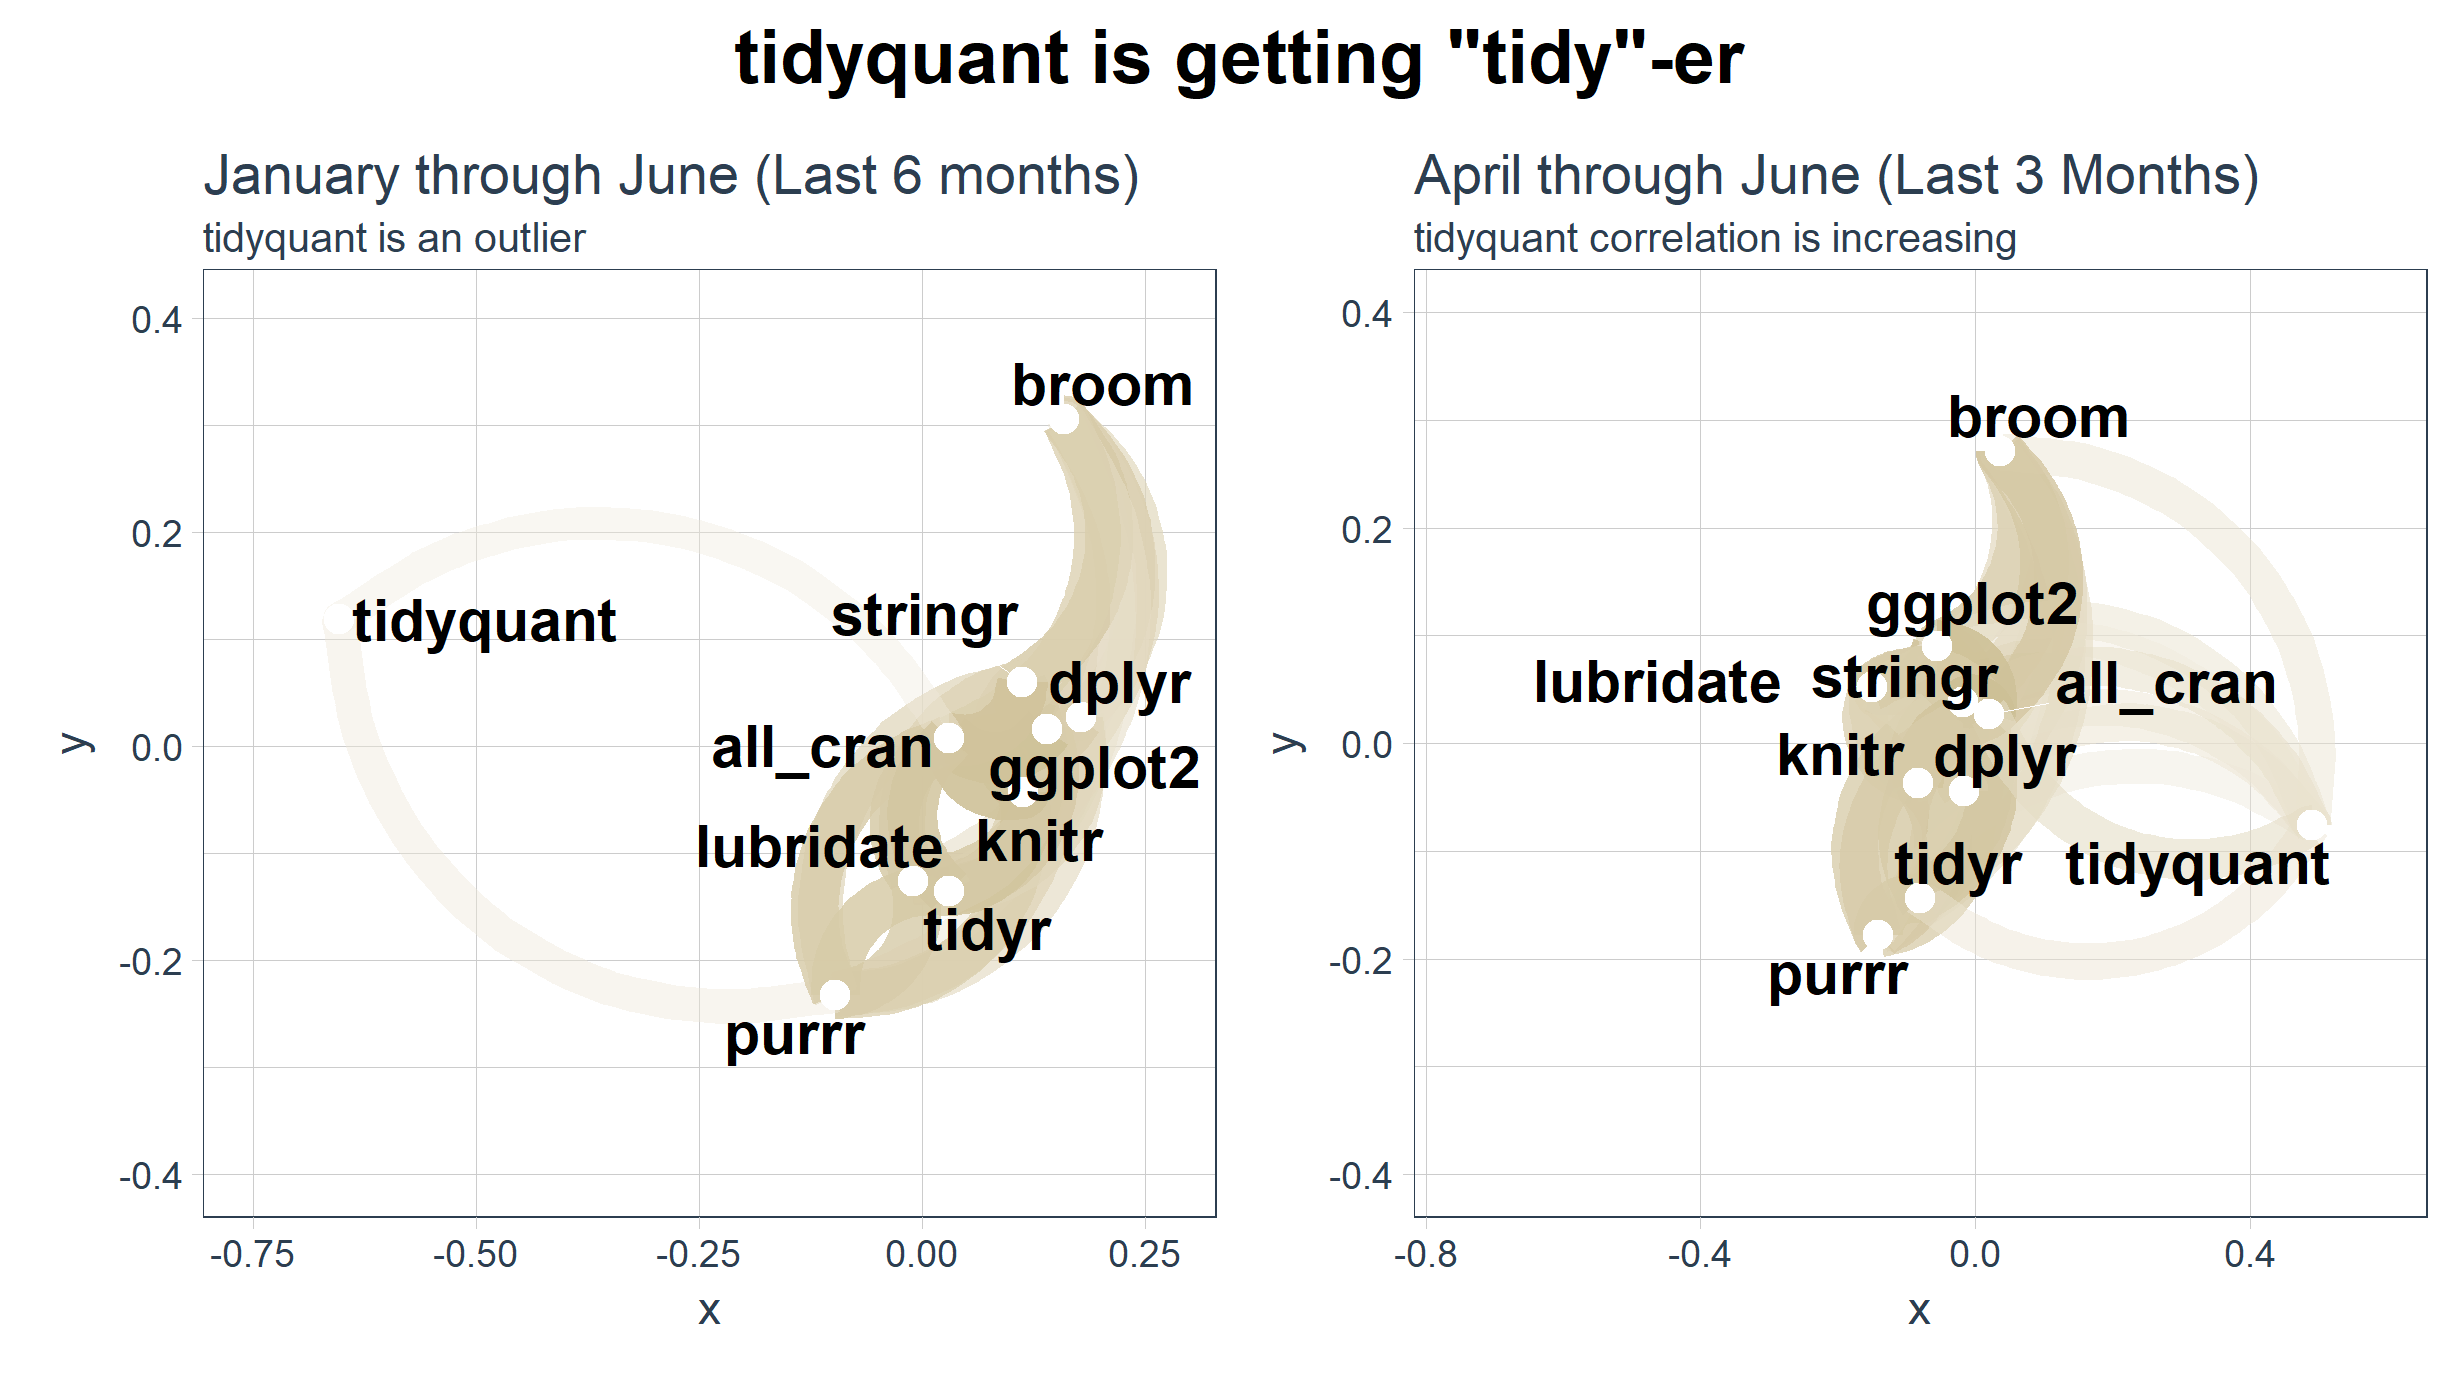 tidyquant correlation over time